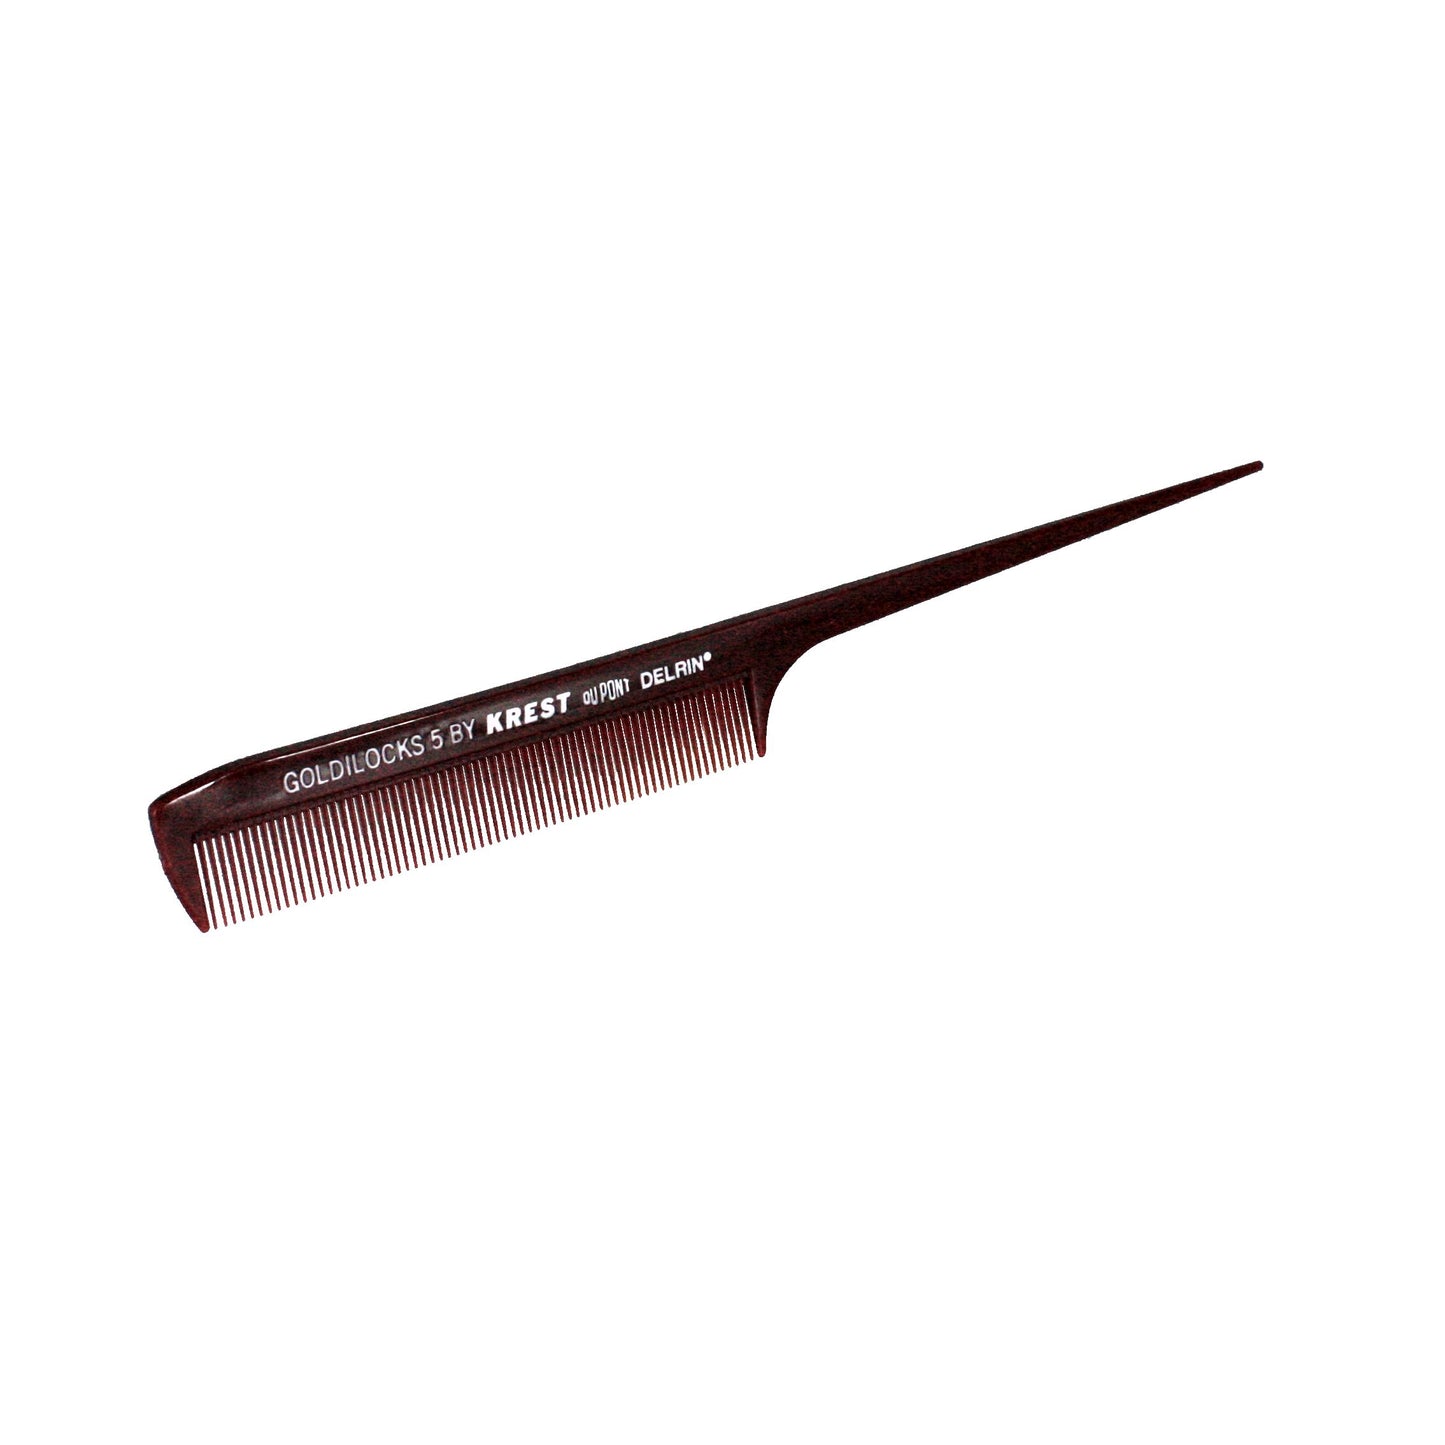 8.5in, Delrin Plastic, Fine Tooth Ratail Comb - CLOSEOUT, LIMITED STOCK AVAILABLE